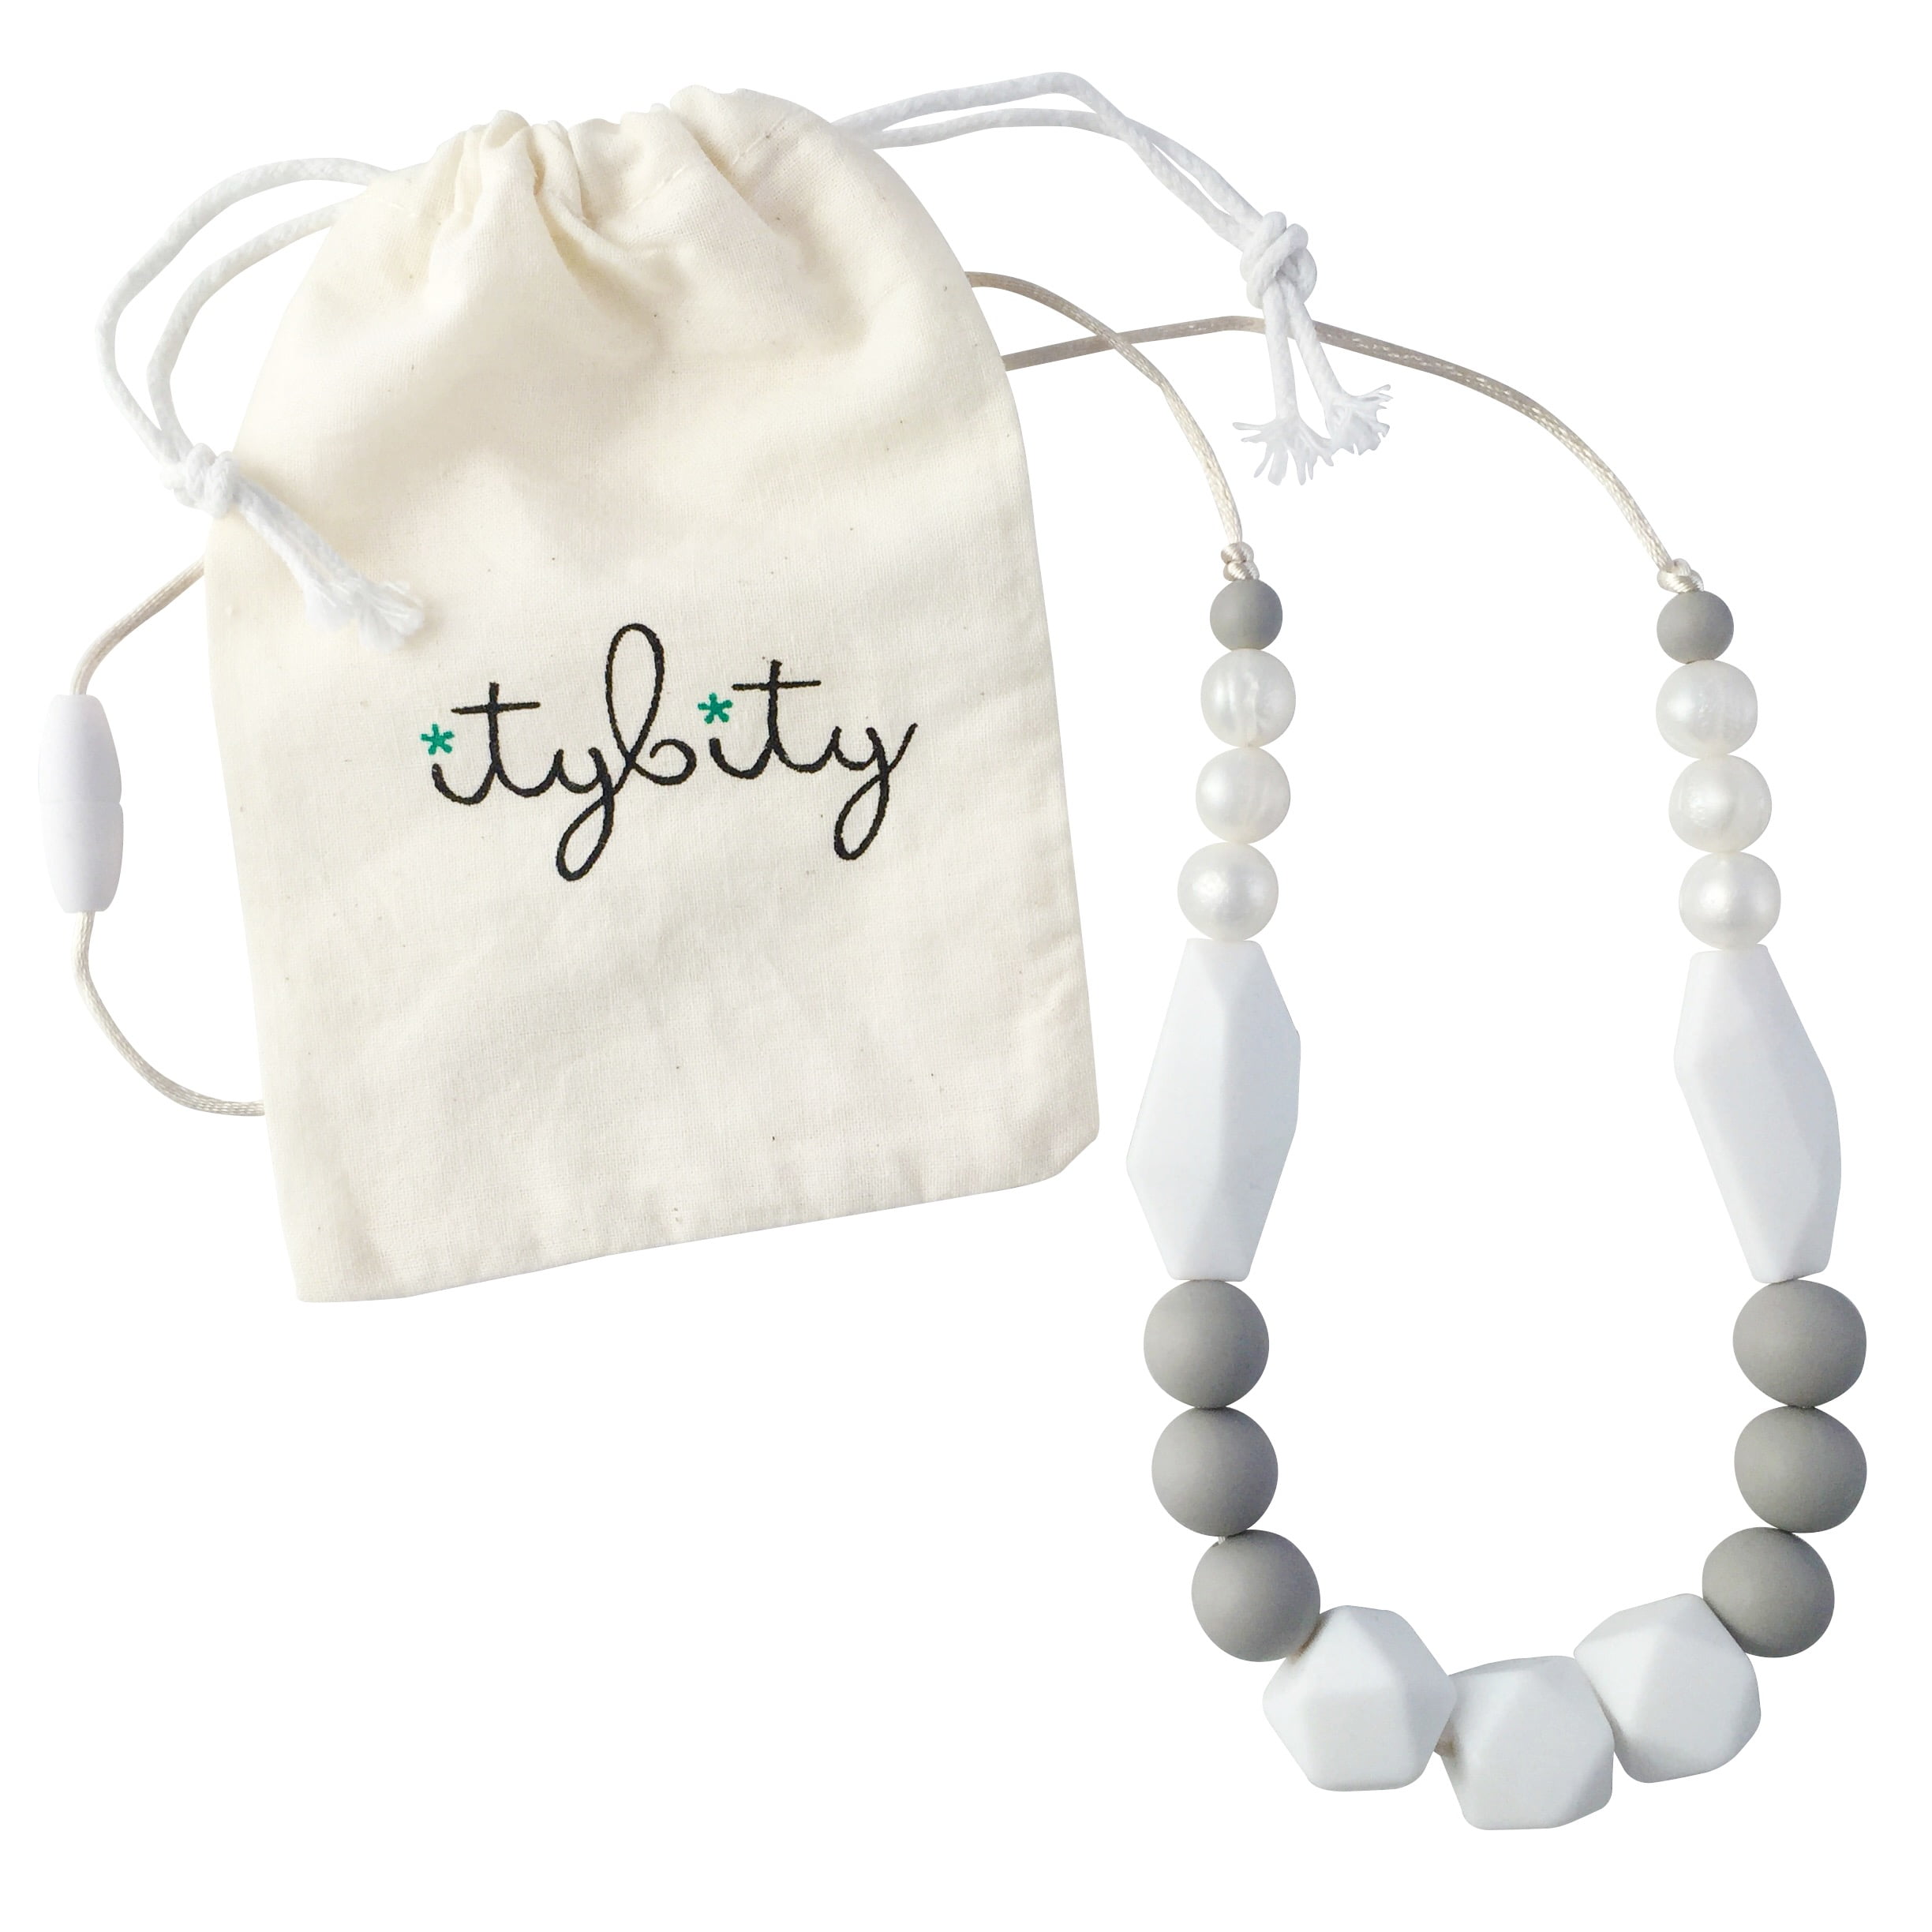 NOVELLA Baby teething necklace for Mom silicone teething beads toys BPA free 